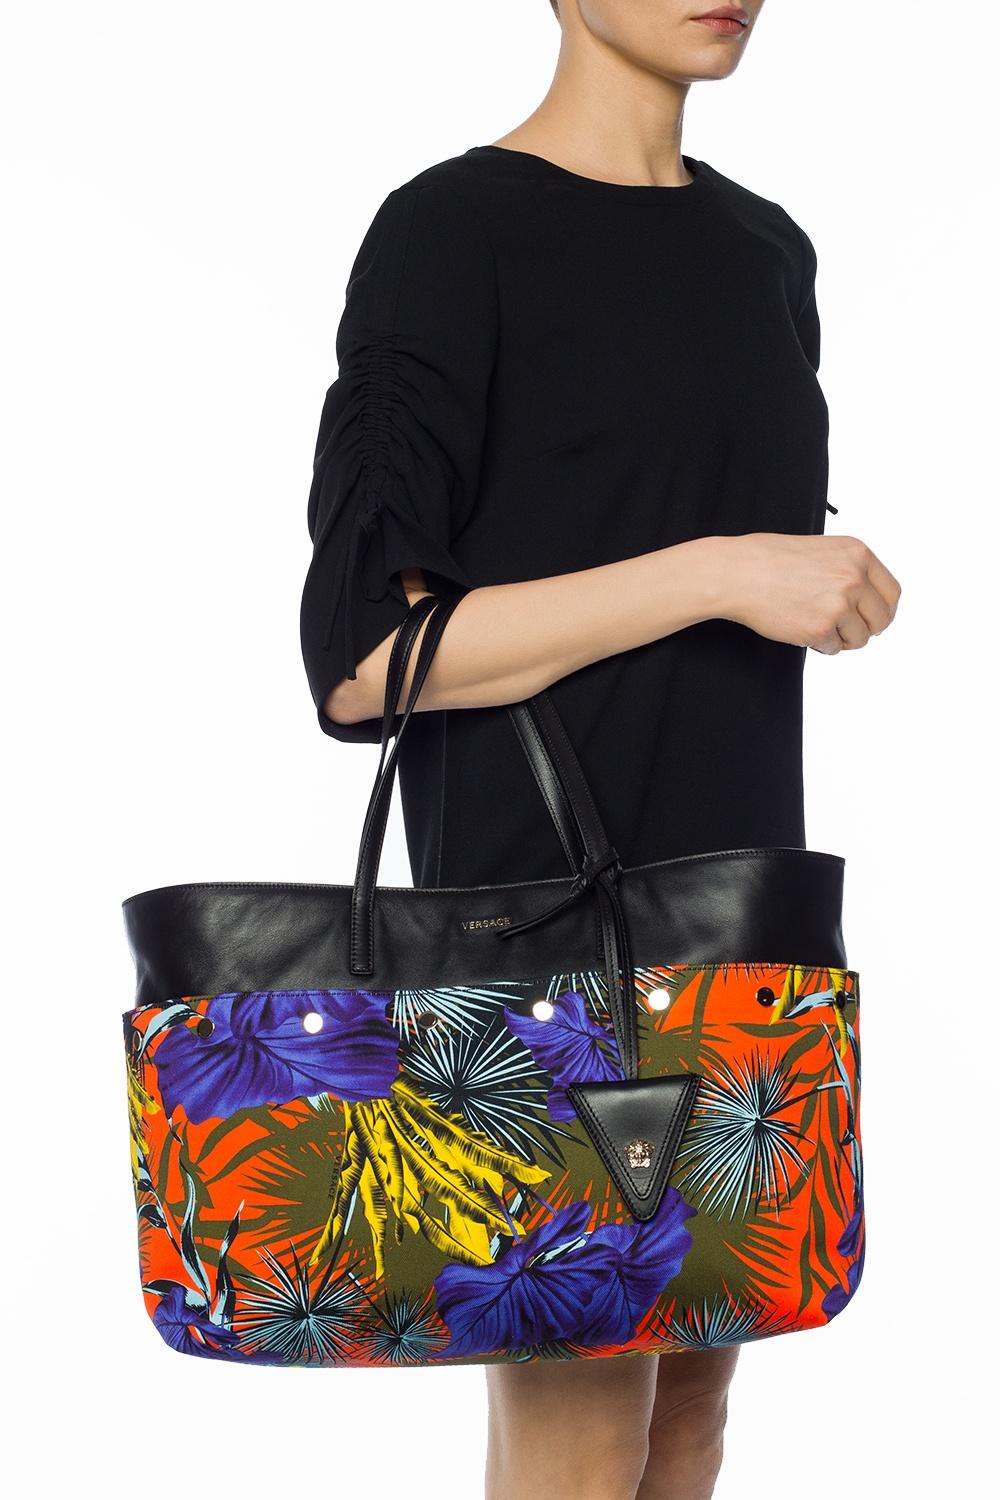 Versace SS18 Multicolor Desert Palm Shopping Tote Bag with Leather Straps

This vibrant colorful shopper bag from Versace is made of cotton and trimmed with leather. Decorated with metal studs, logo and 'Desert Palm' print. 2 semi-round handles with